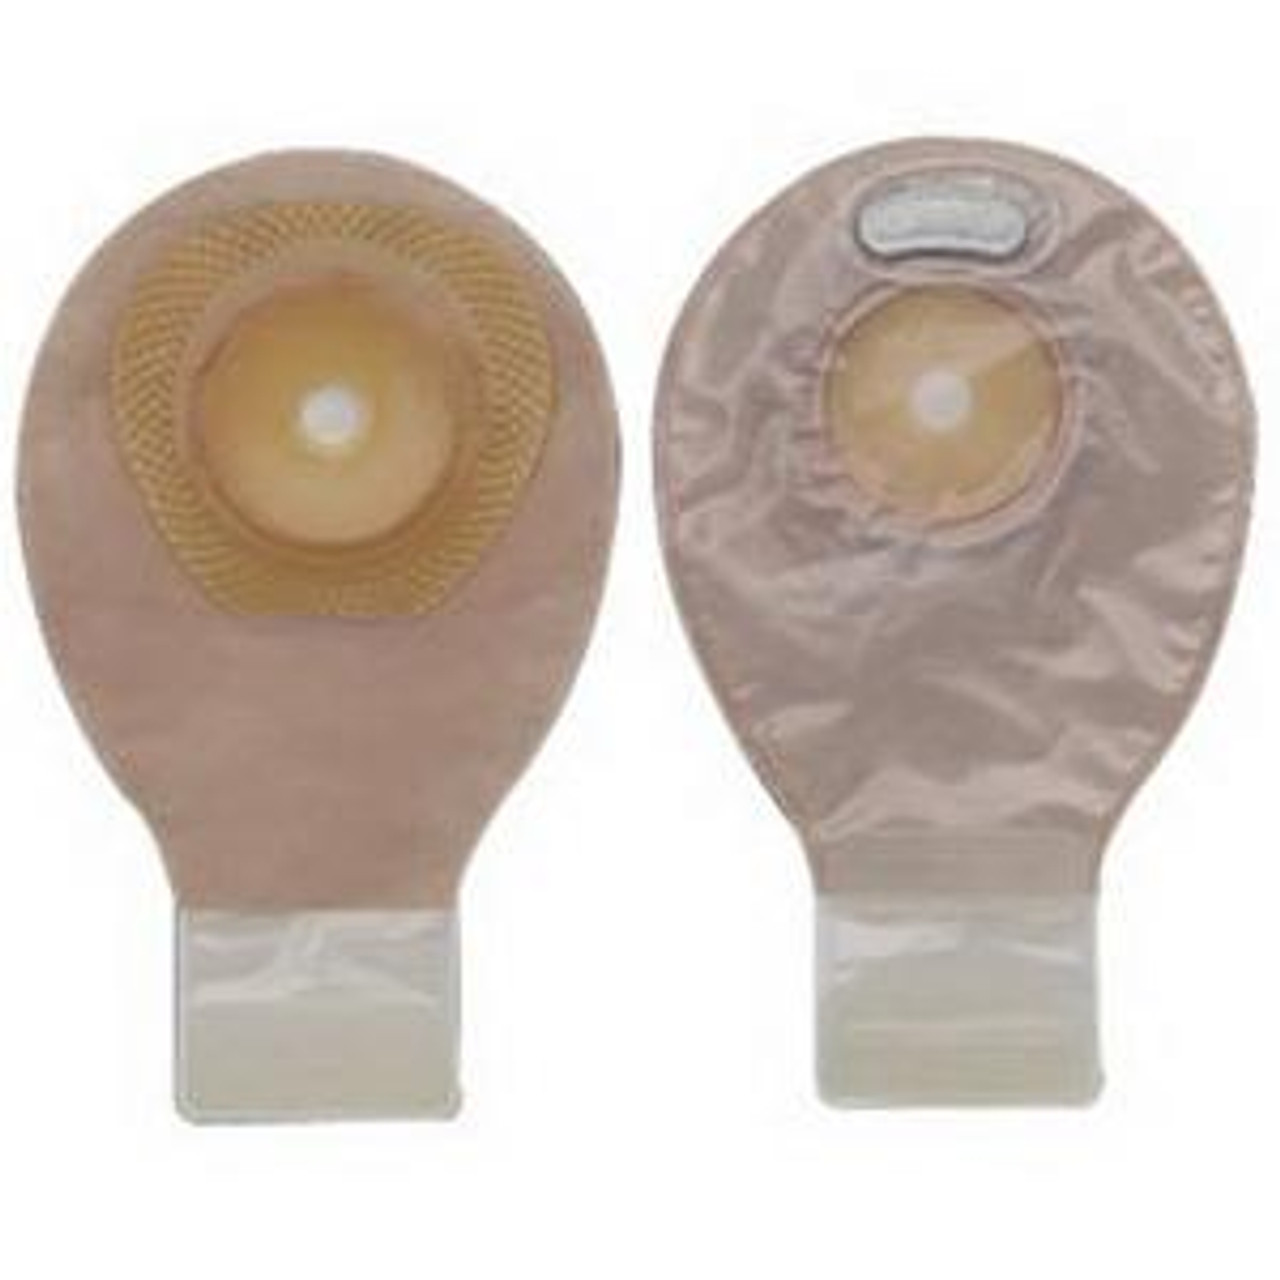 New Image™ Two-Piece Drainable Mini Ostomy Pouch, Hollister